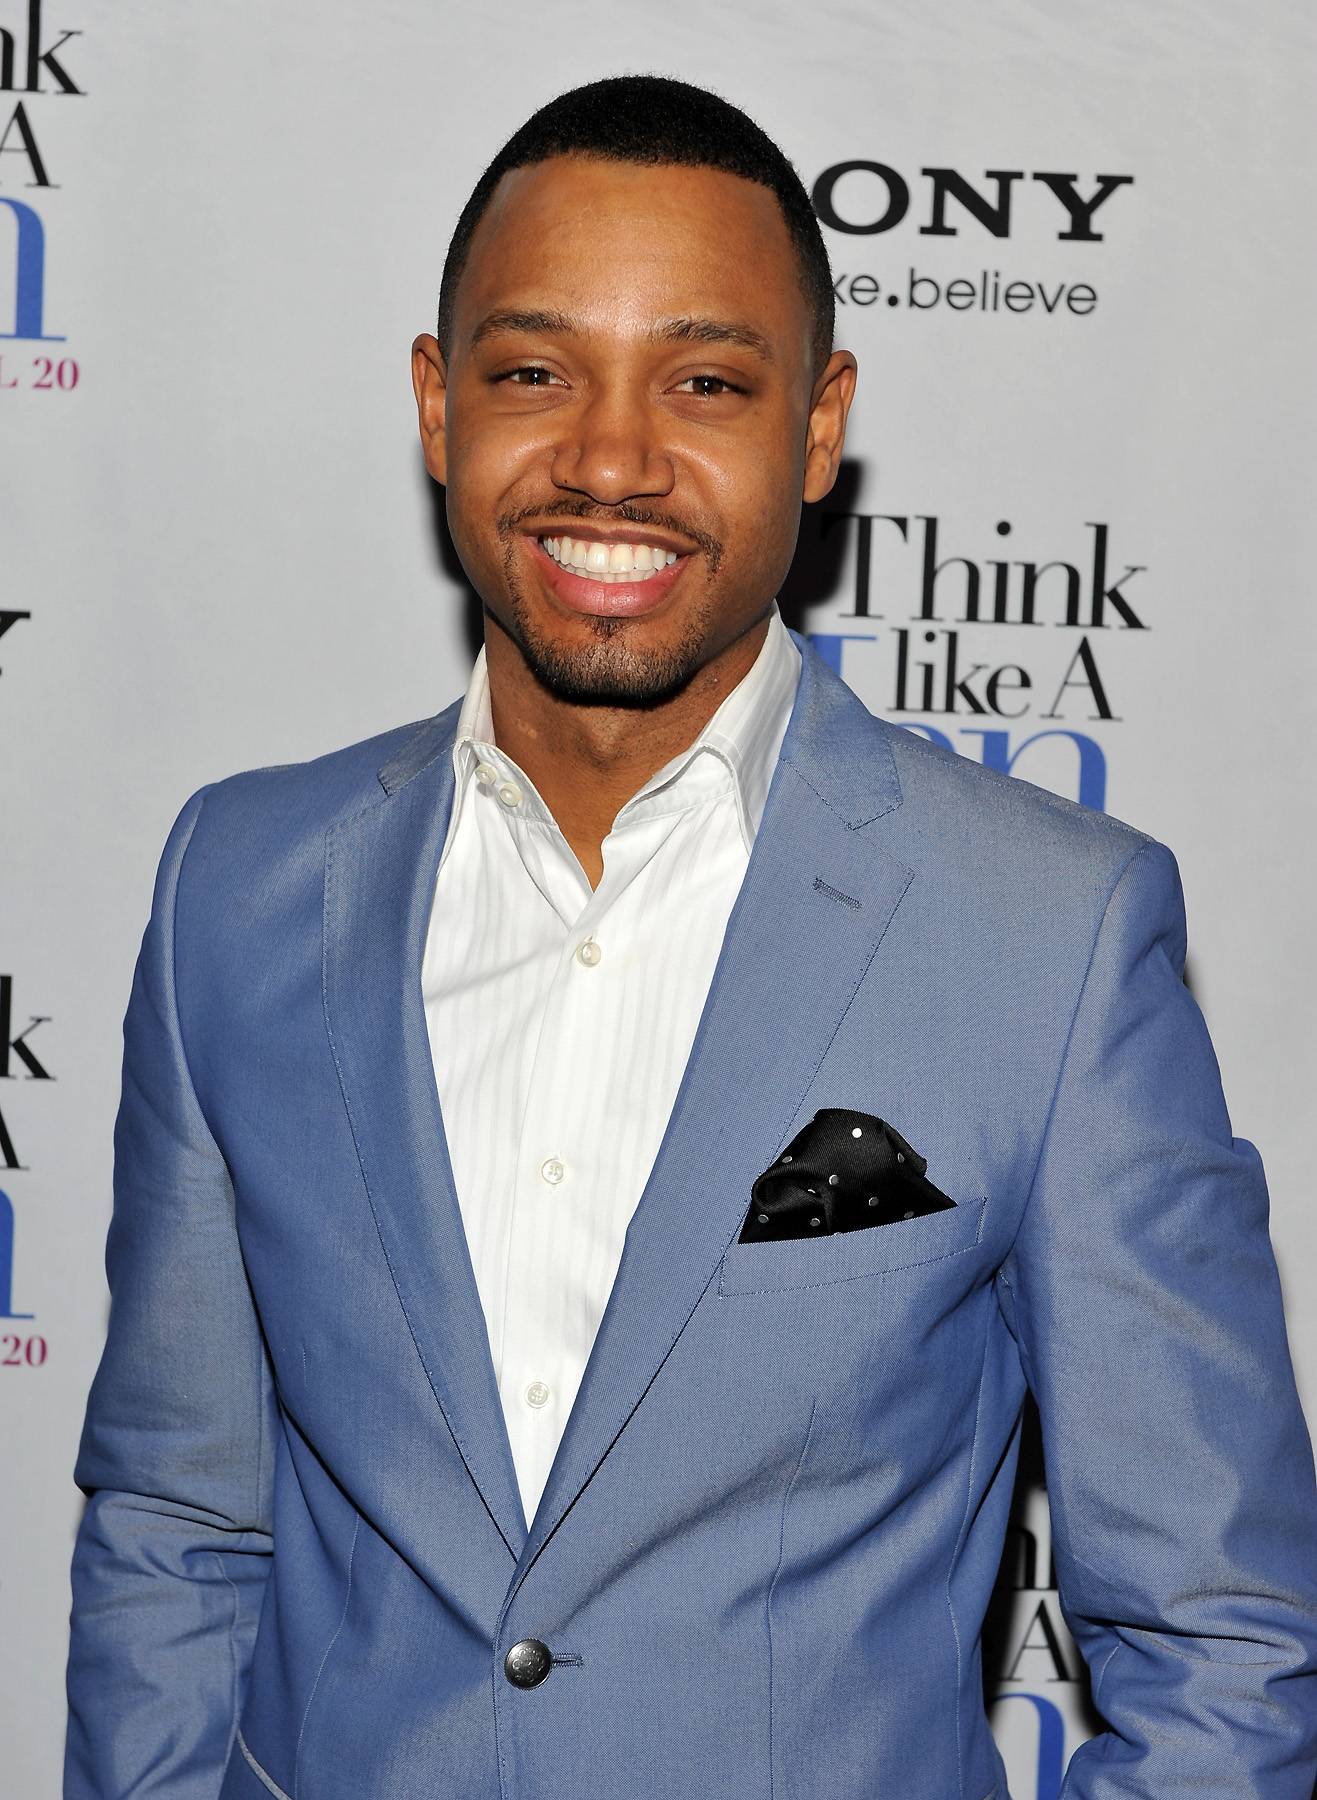 Terrence J (@TerrenceJ) - TWEET: &quot;About to be on Wendy Williams live in a few mins. Tune in! #ThinkLikeAMan&quot;  106 and Park host Terrence J anticipates his appearance on The Wendy Williams Show to promote his upcoming film Think Like a Man.(Photo: Fernando Leon/Getty Images)